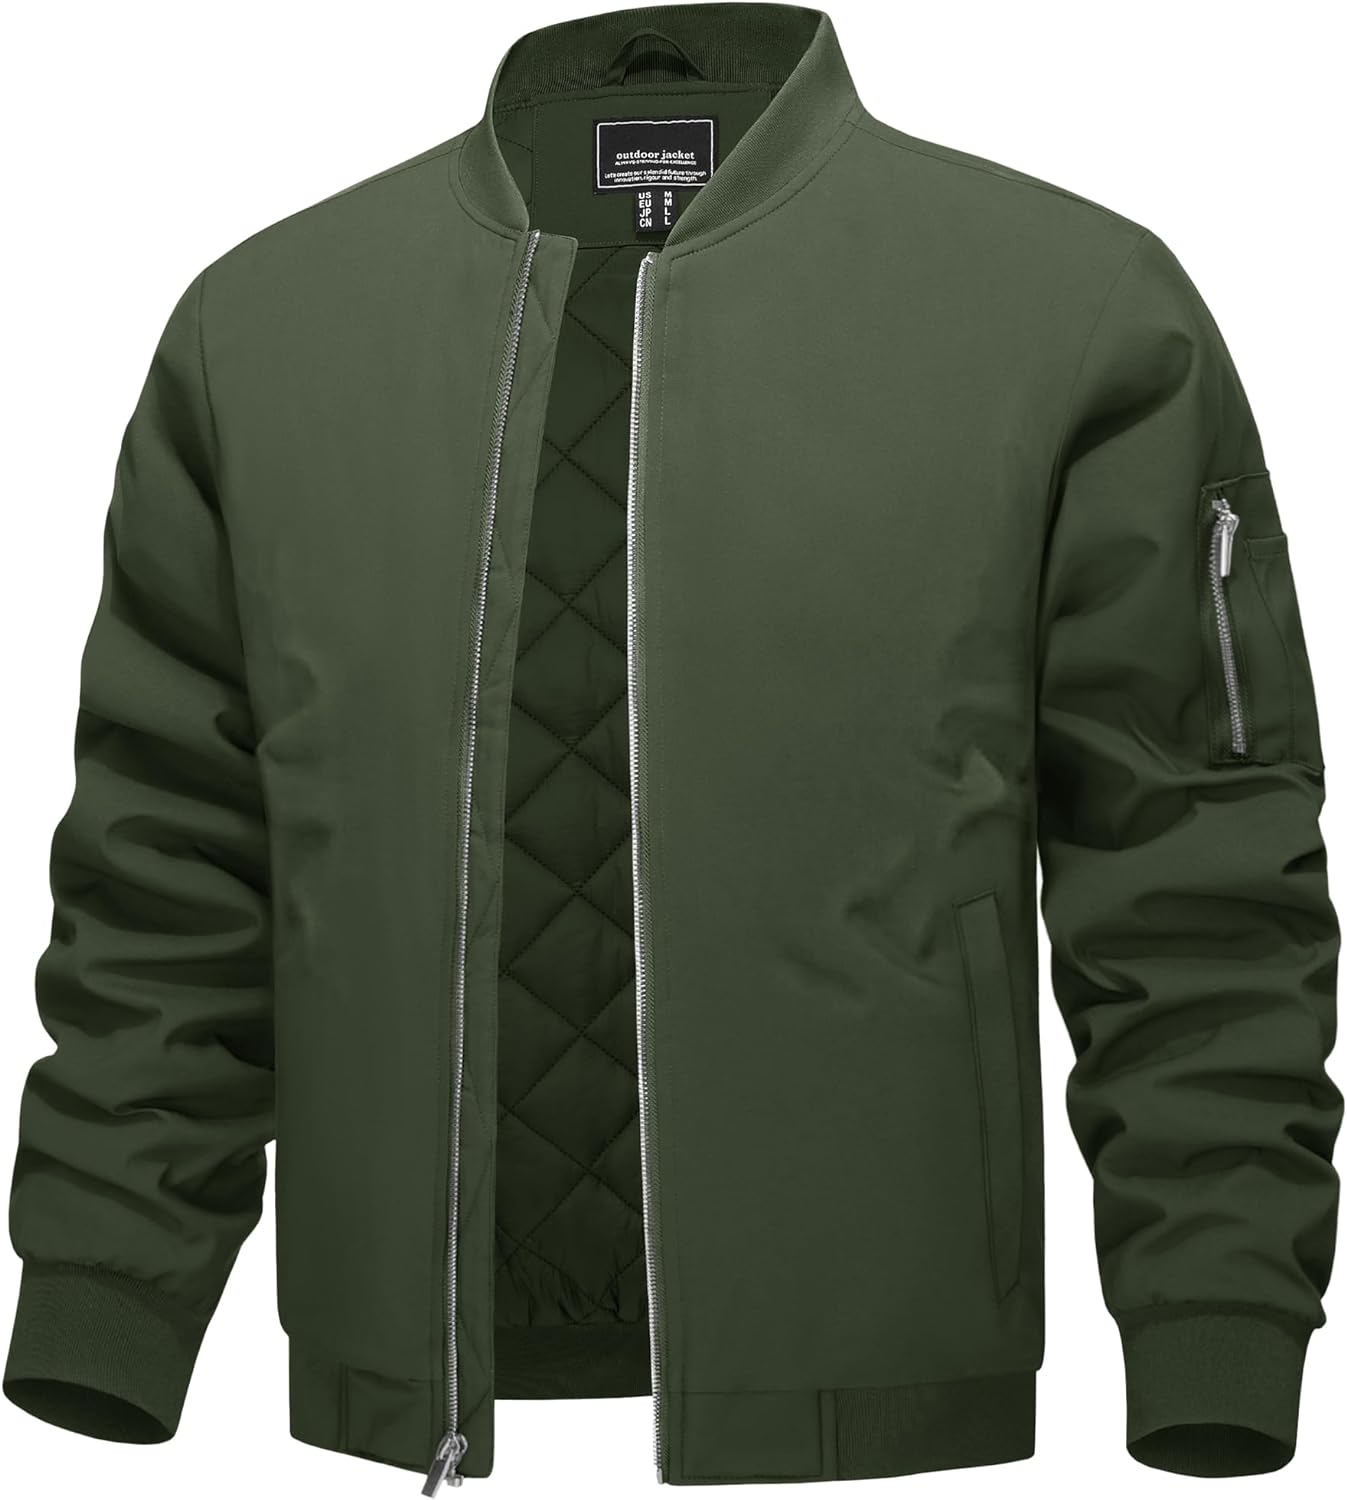 Army green thermal quilted bomber jacket with zippered pocket on the left arm